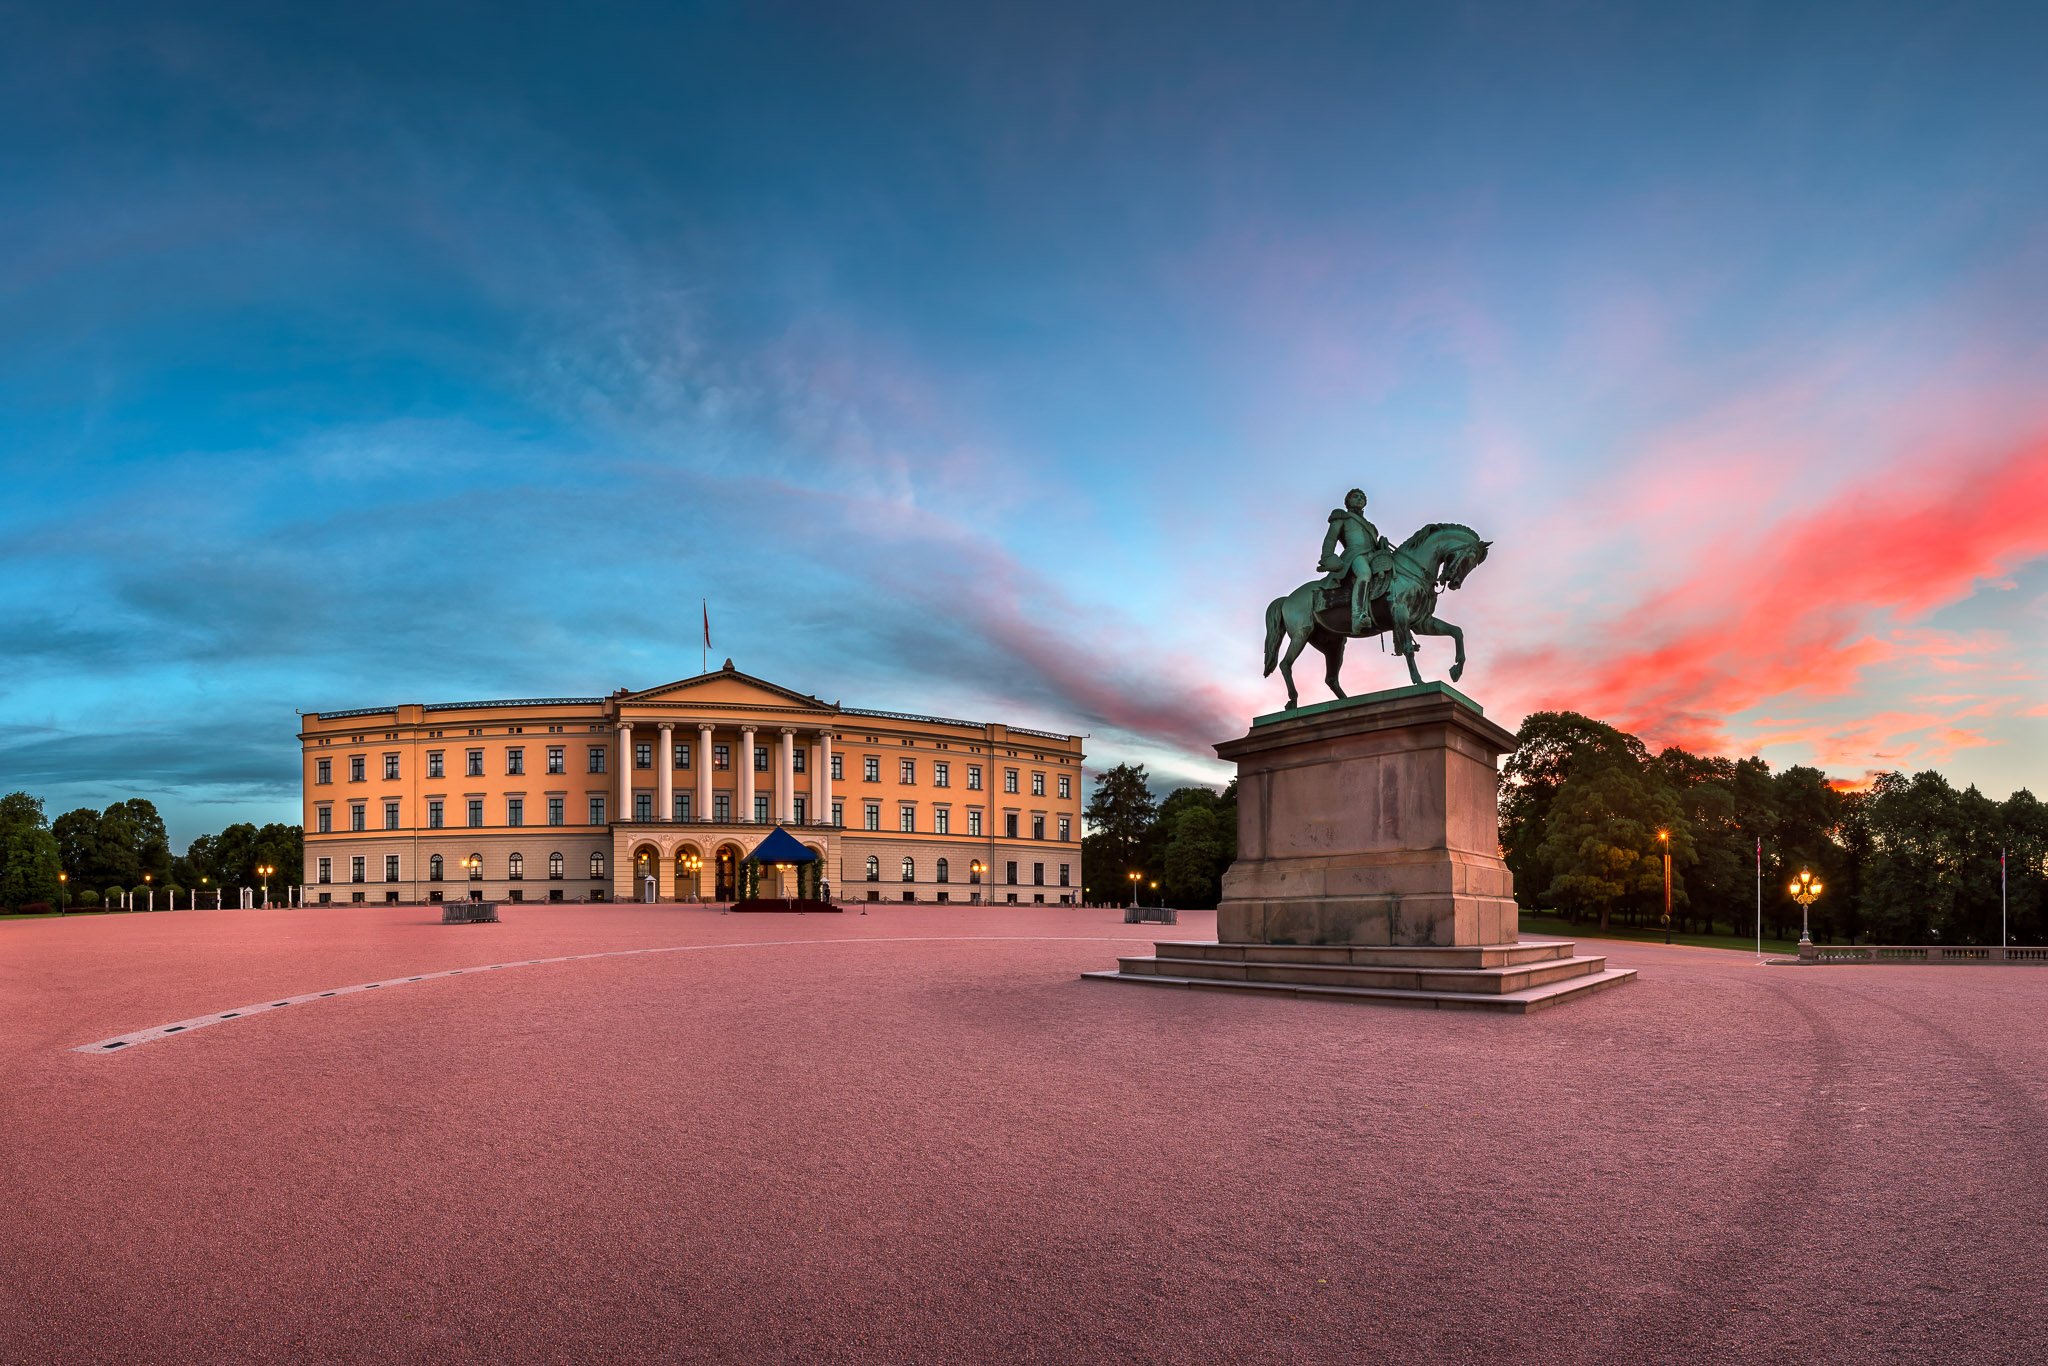 architecture, blue, building, capital, castle, city, cityscape, culture, dawn, europe, european, facade, garden, history, horse, illuminated, johan, karl, king, landmark, landscape, lights, monarch, monument, morning, norway, norwegian, old, oslo, palace,, Andrey Omelyanchuk